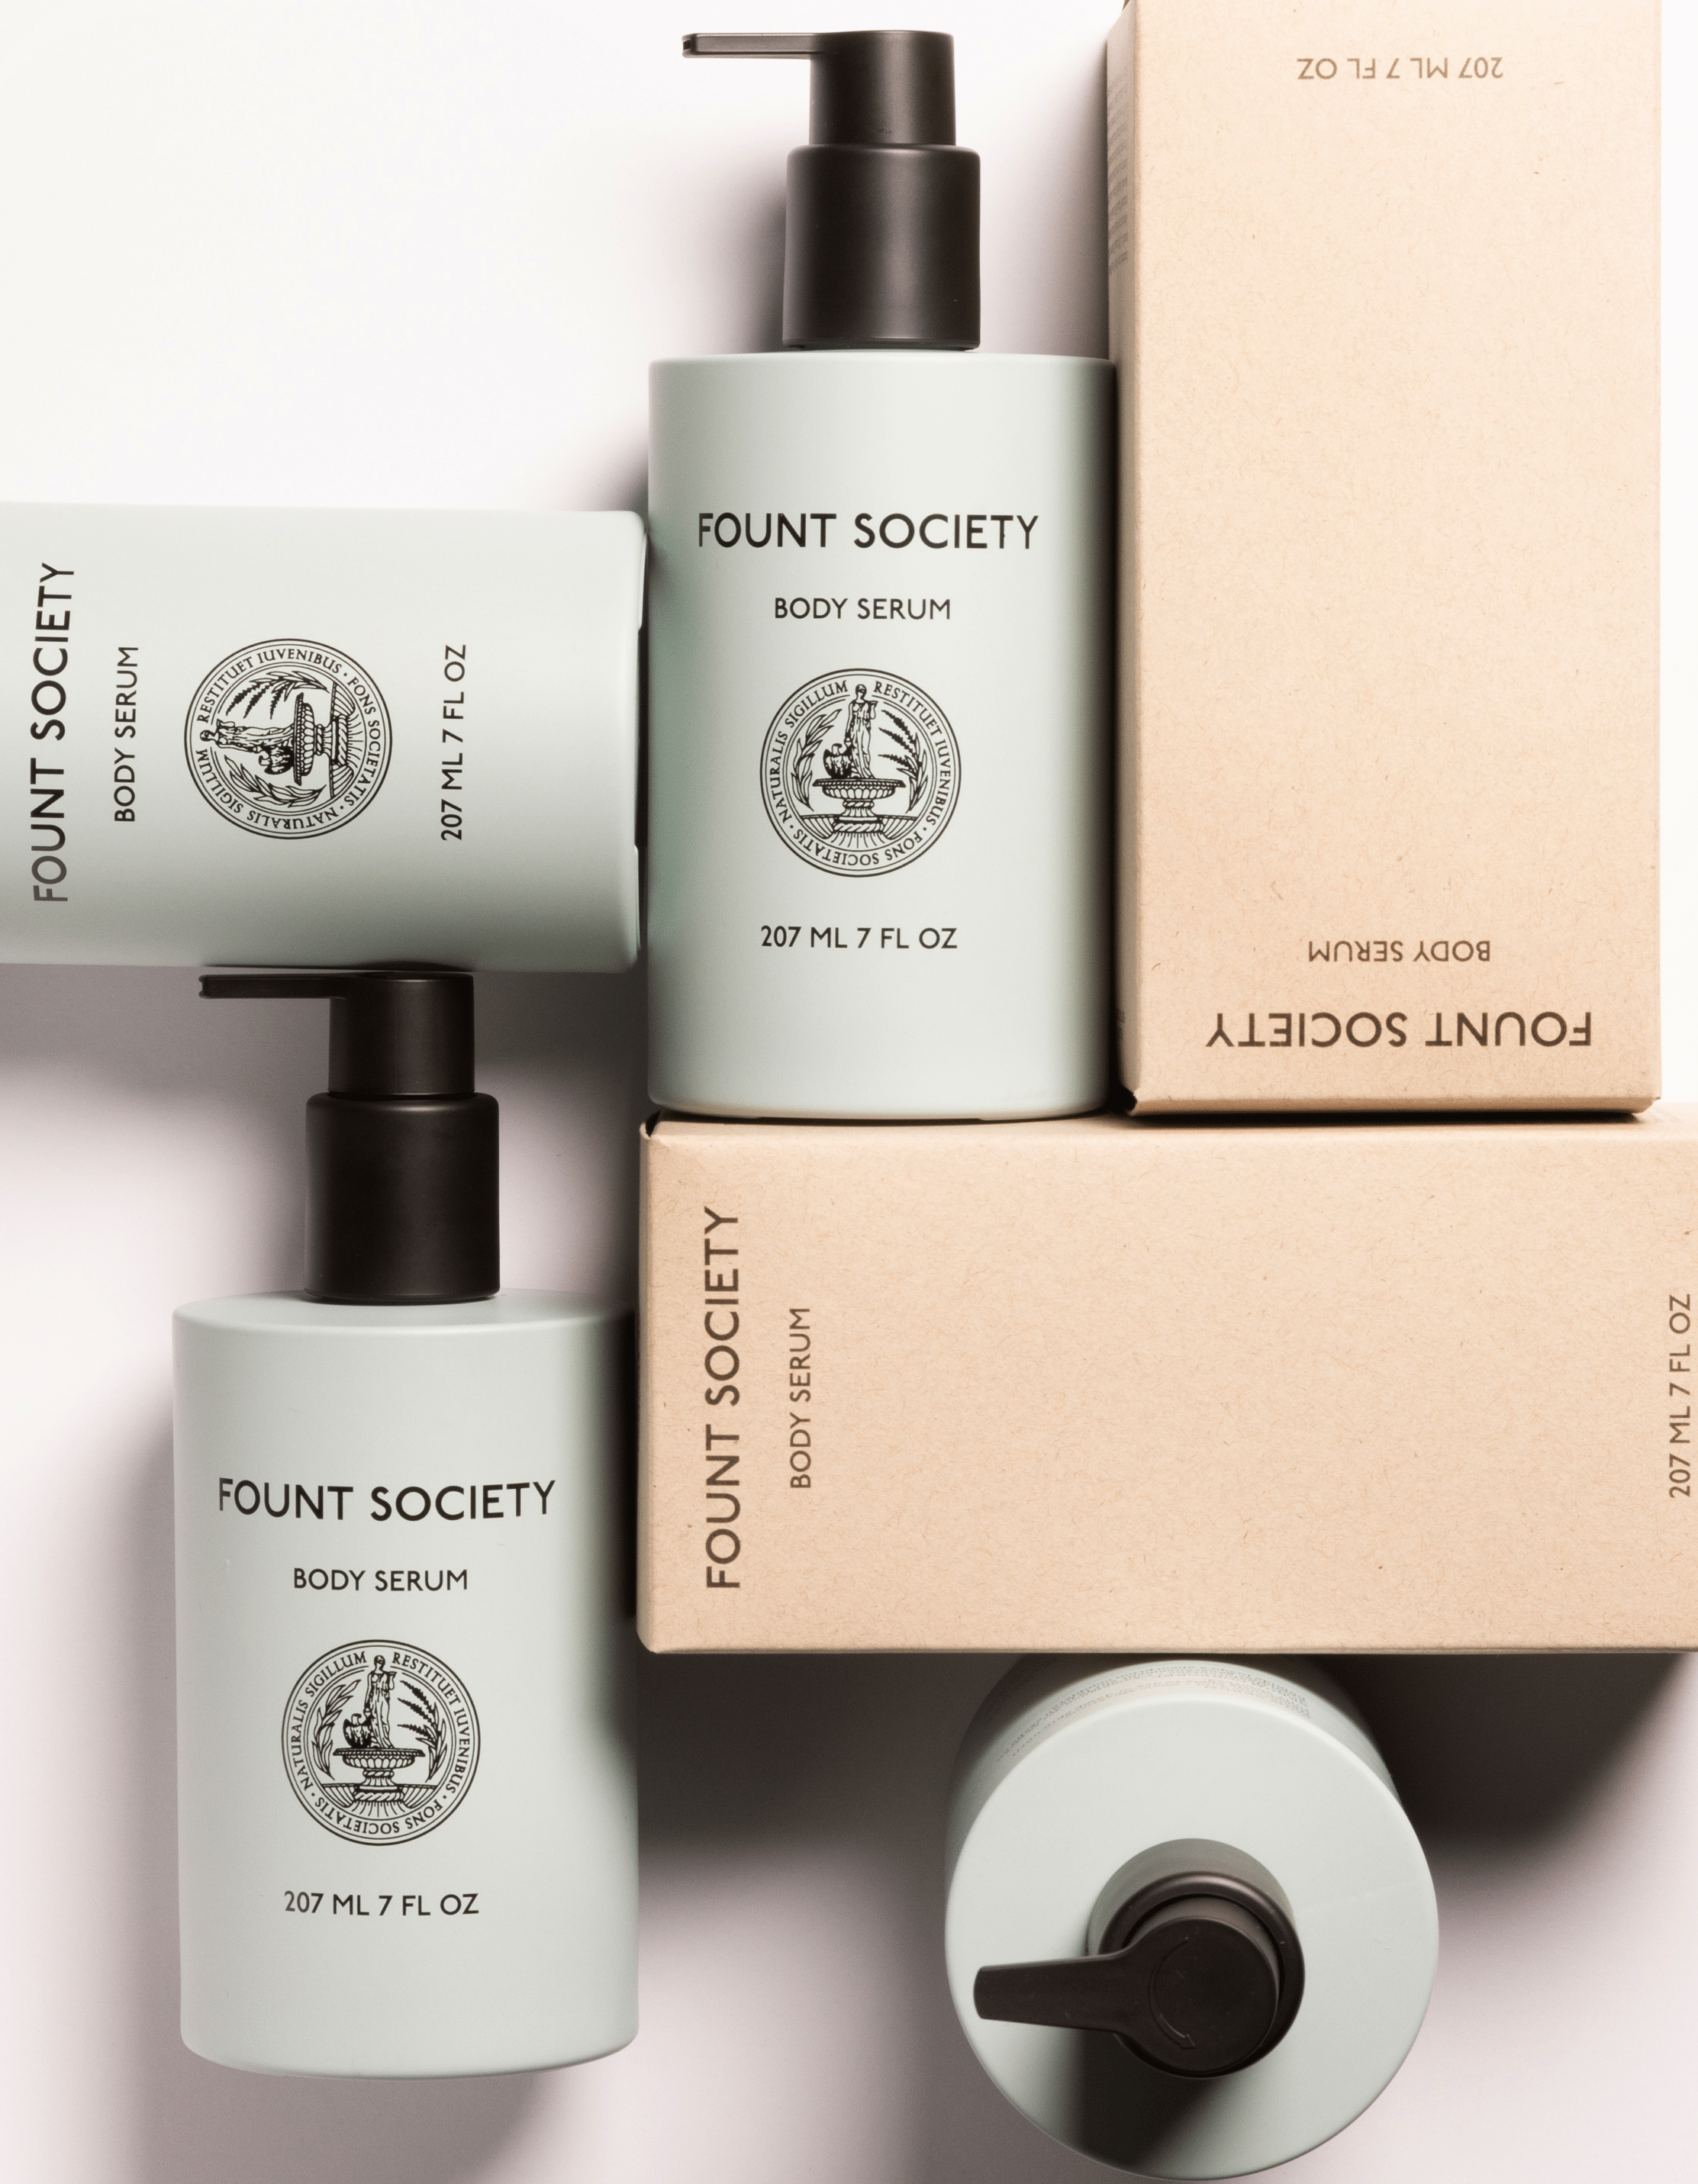 Arrangement of Cozy Earth Body Serum bottles, each 207 ml/7 fl. oz., with minimalist labels featuring a circular emblem. Some bottles lie horizontally while others stand upright. Two cardboard boxes are also included. The scene is bright and clean.